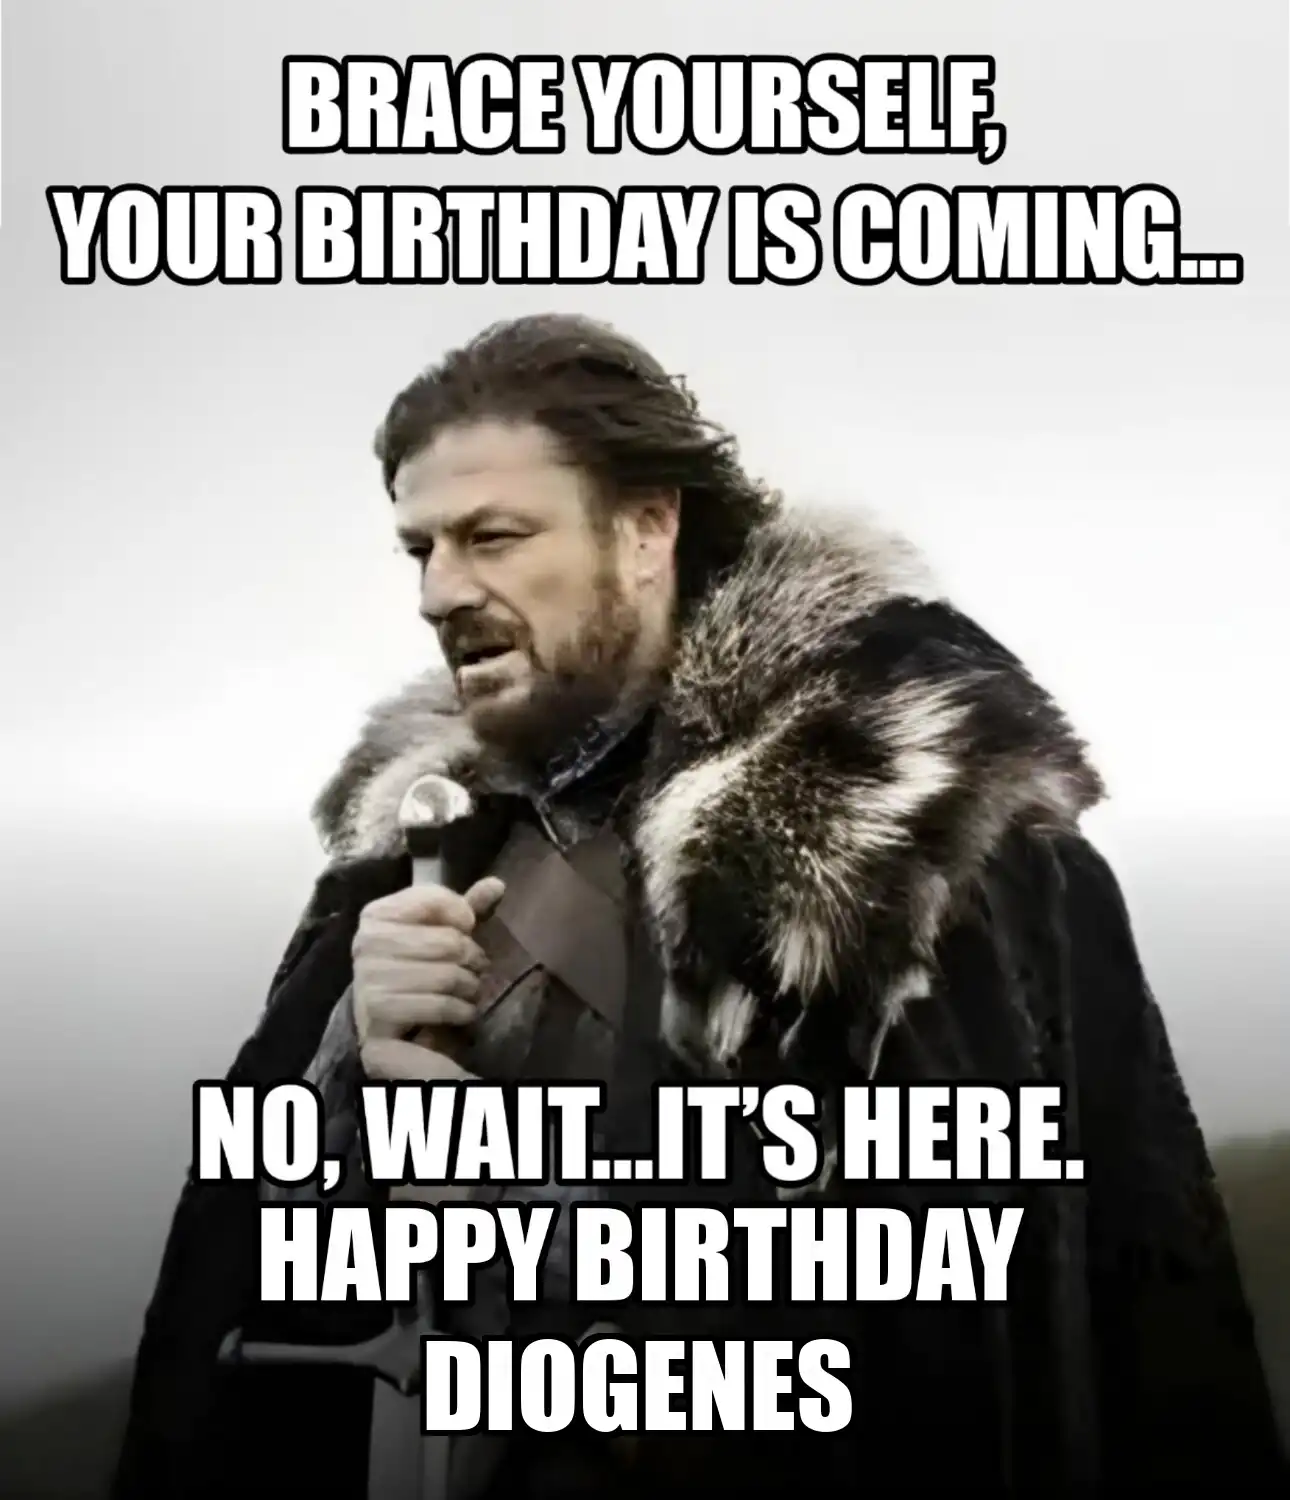 Happy Birthday Diogenes Brace Yourself Your Birthday Is Coming Meme